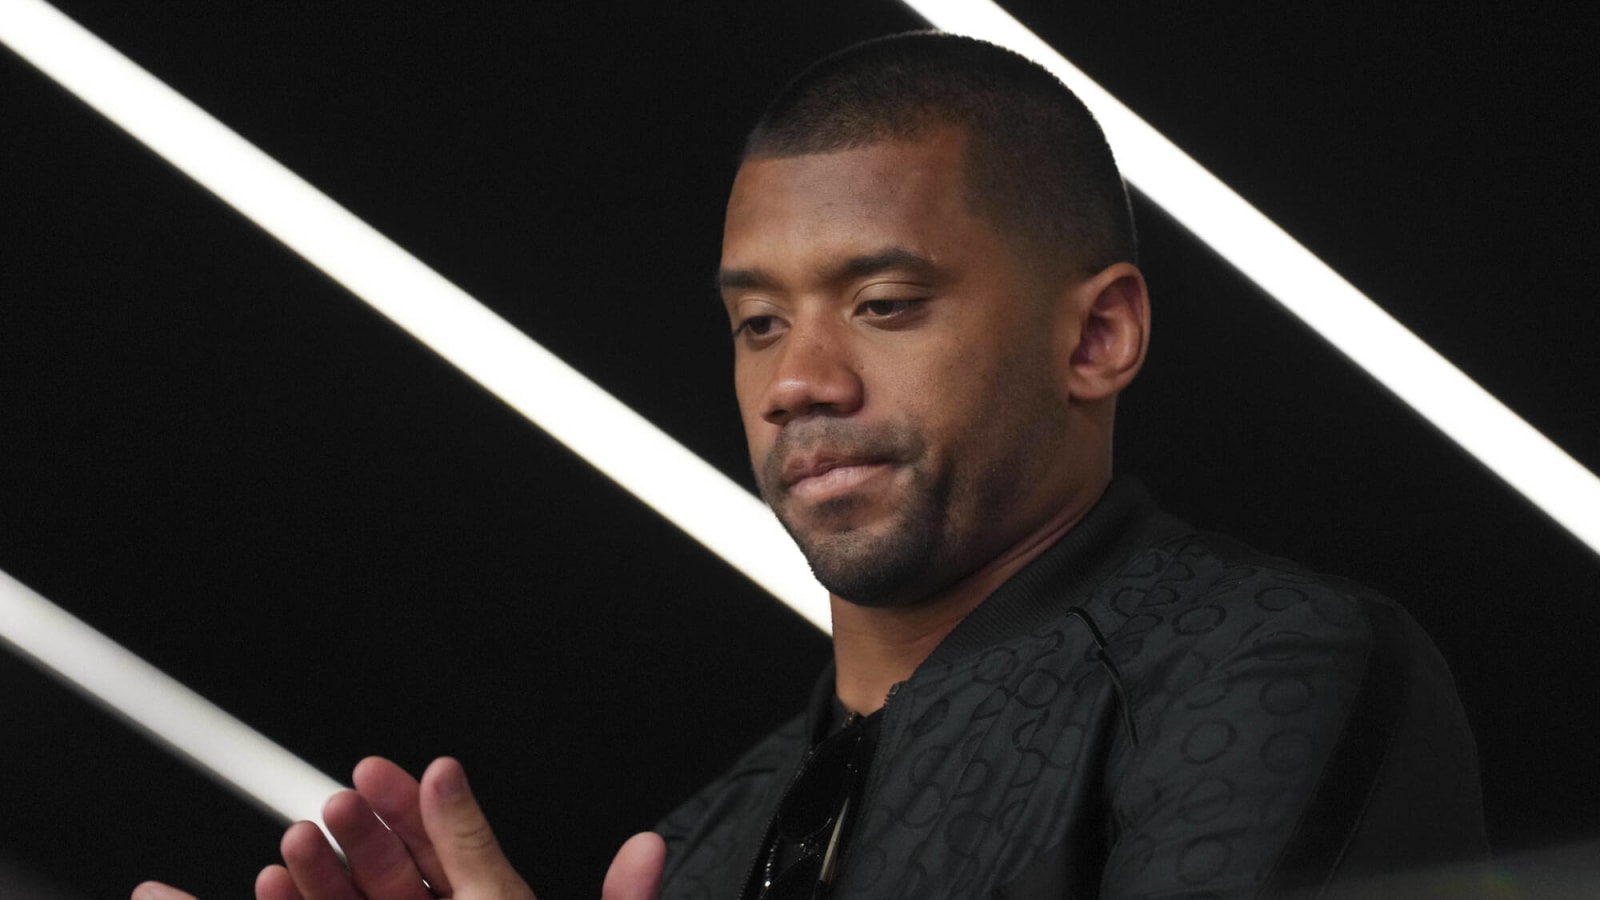 Steelers’ Russell Wilson Gets Real About His Failure In Denver: 'Just Learned A Lot'